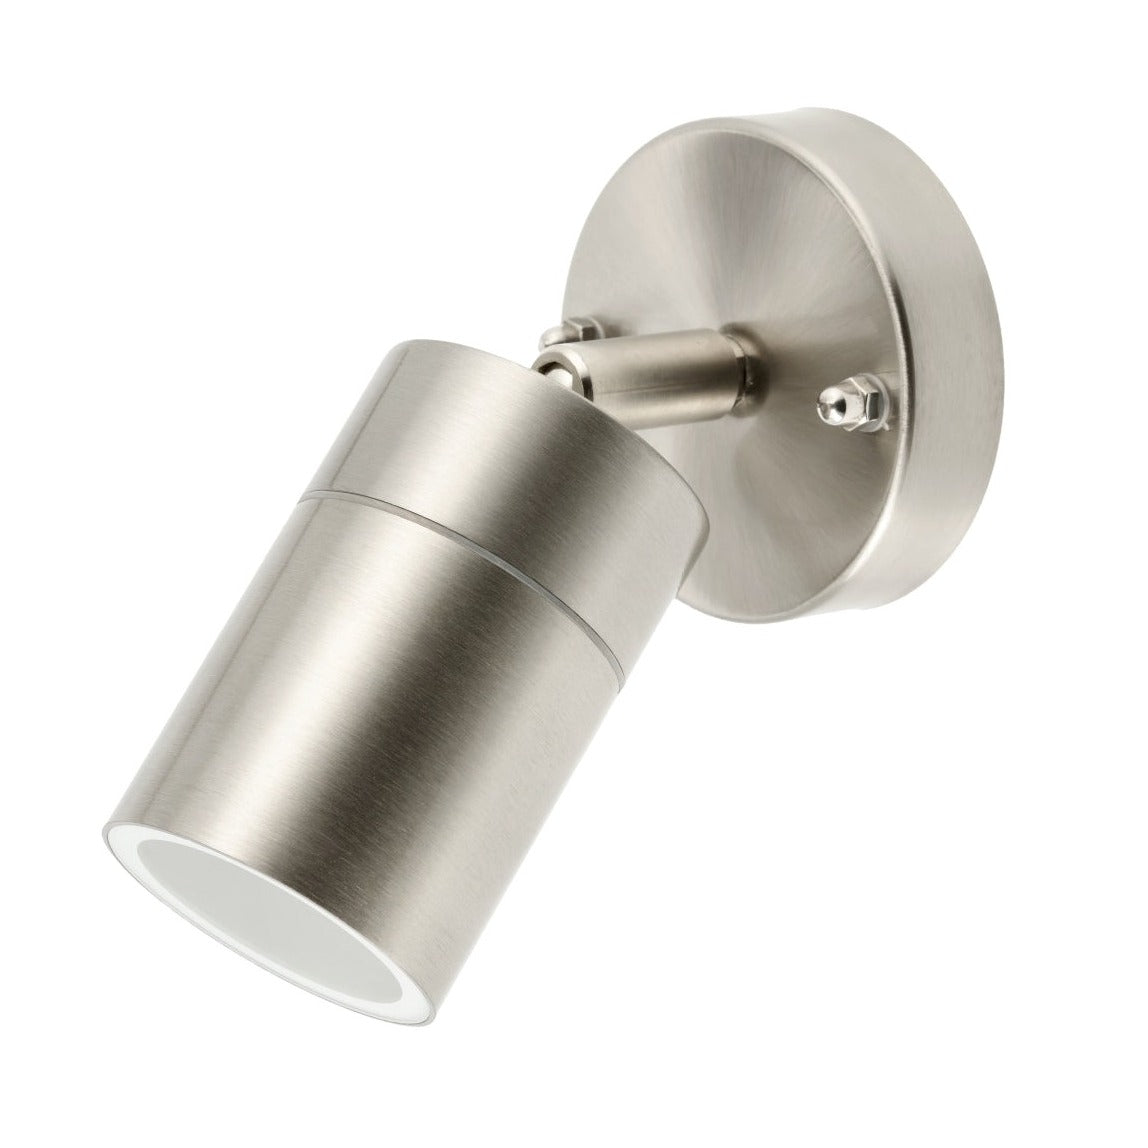 The Alesha outdoor adjustable single spotlight has a sleek brushed stainless steel finish and offers a stunning designer look at an affordable price. Other colour options are available. The light can be adjusted for a desired look.